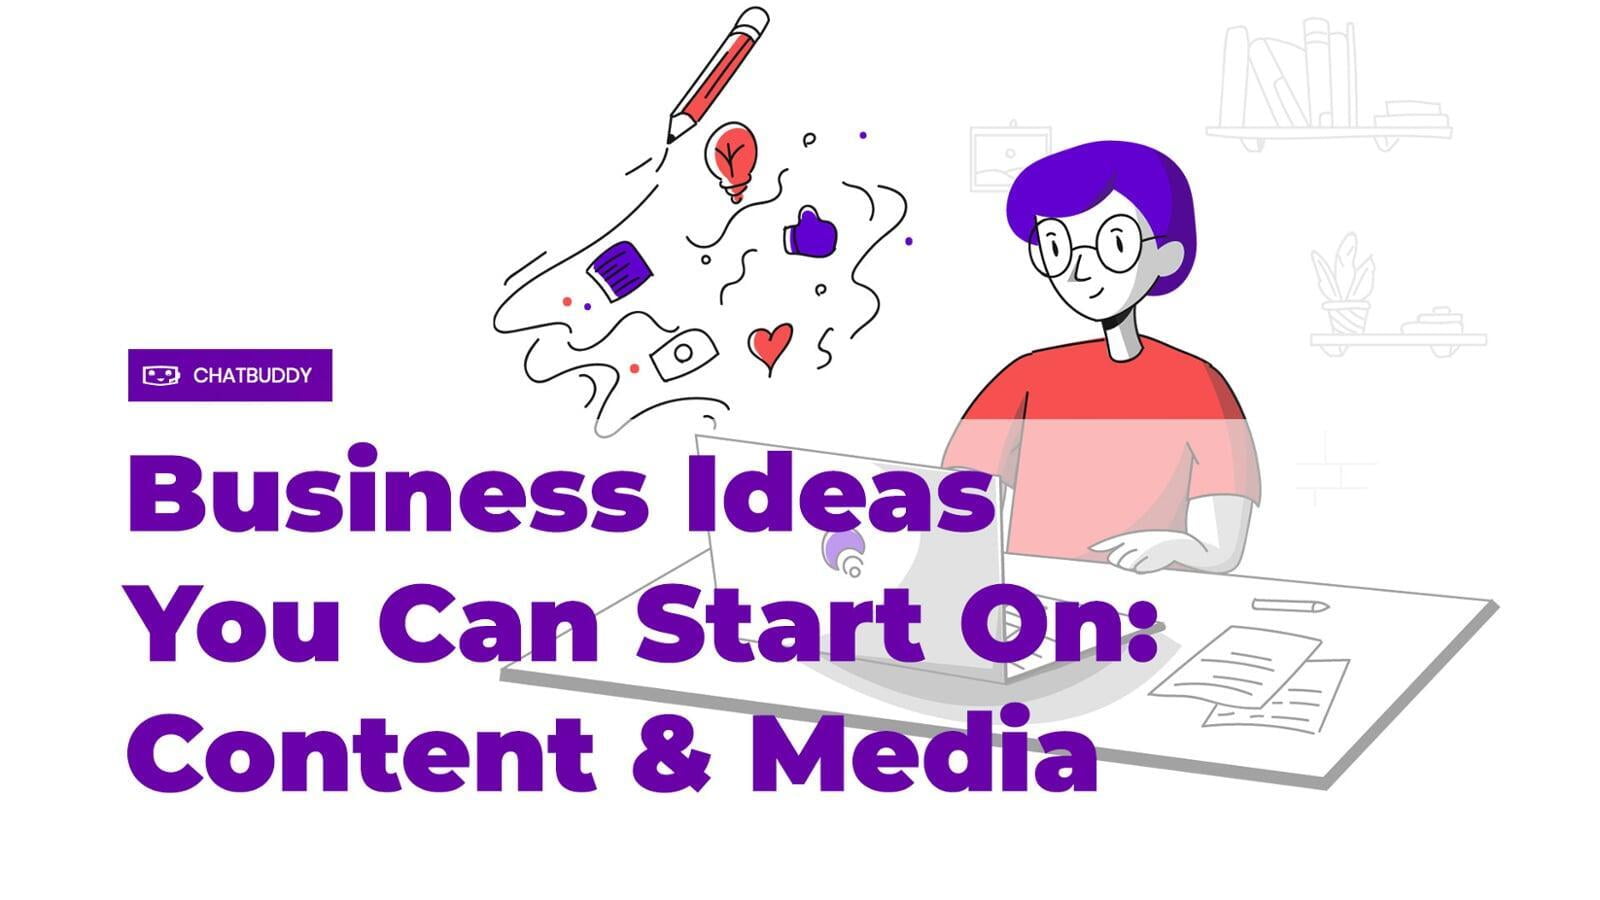 Business Ideas You Can Start On: Content & Media